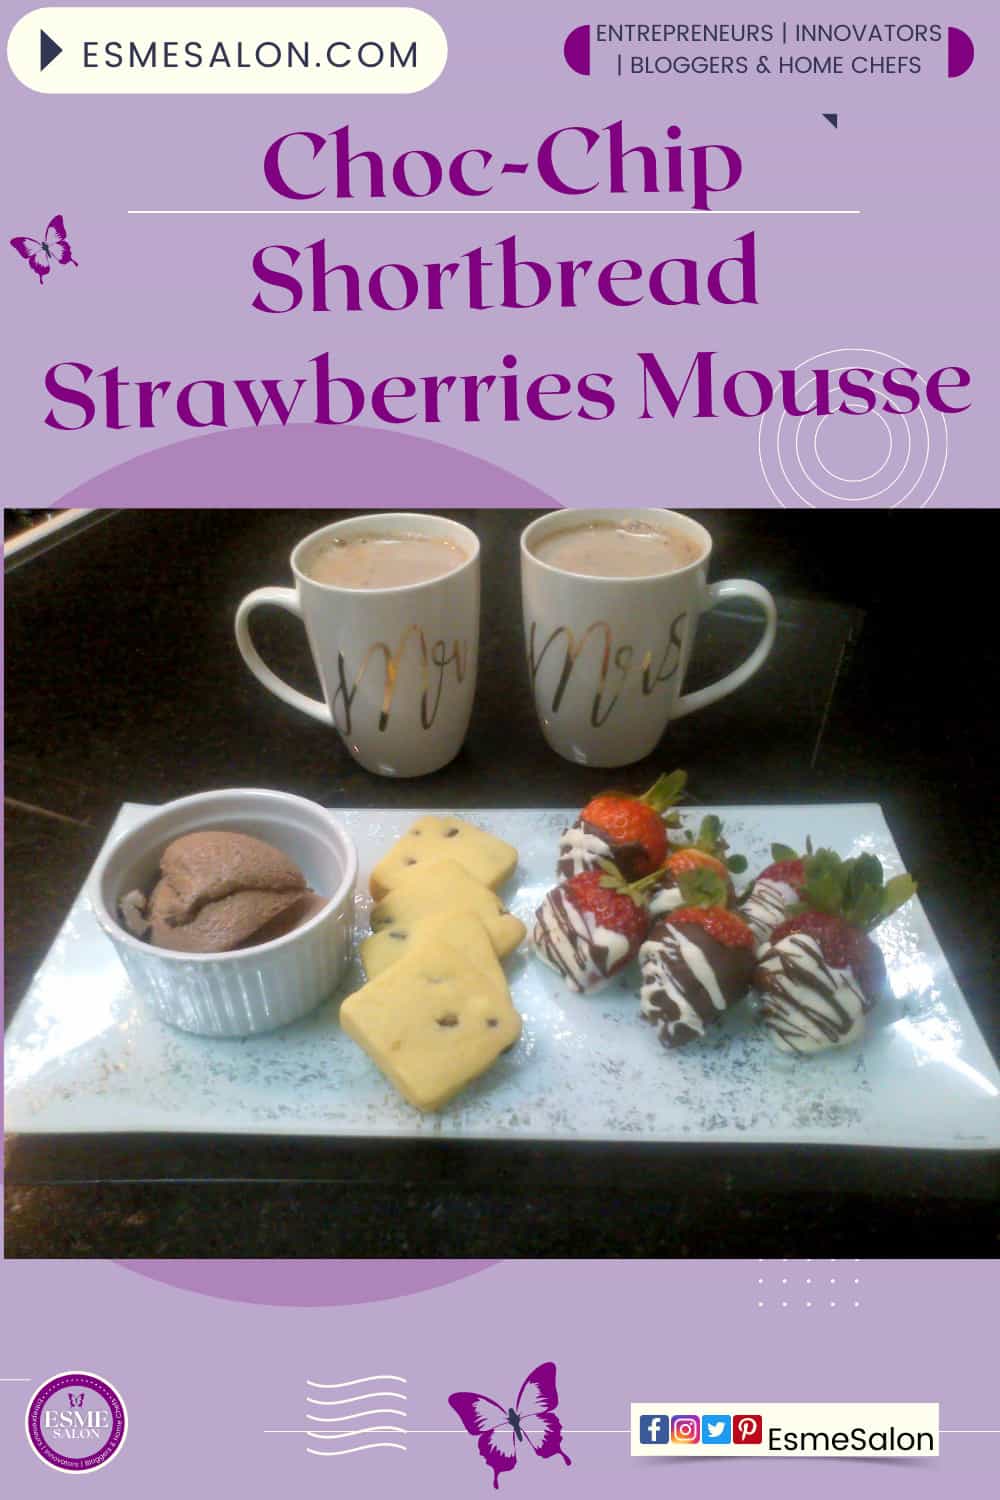 An image of a white oblong plate with some Choc-Chip Shortbread Strawberries Mousse